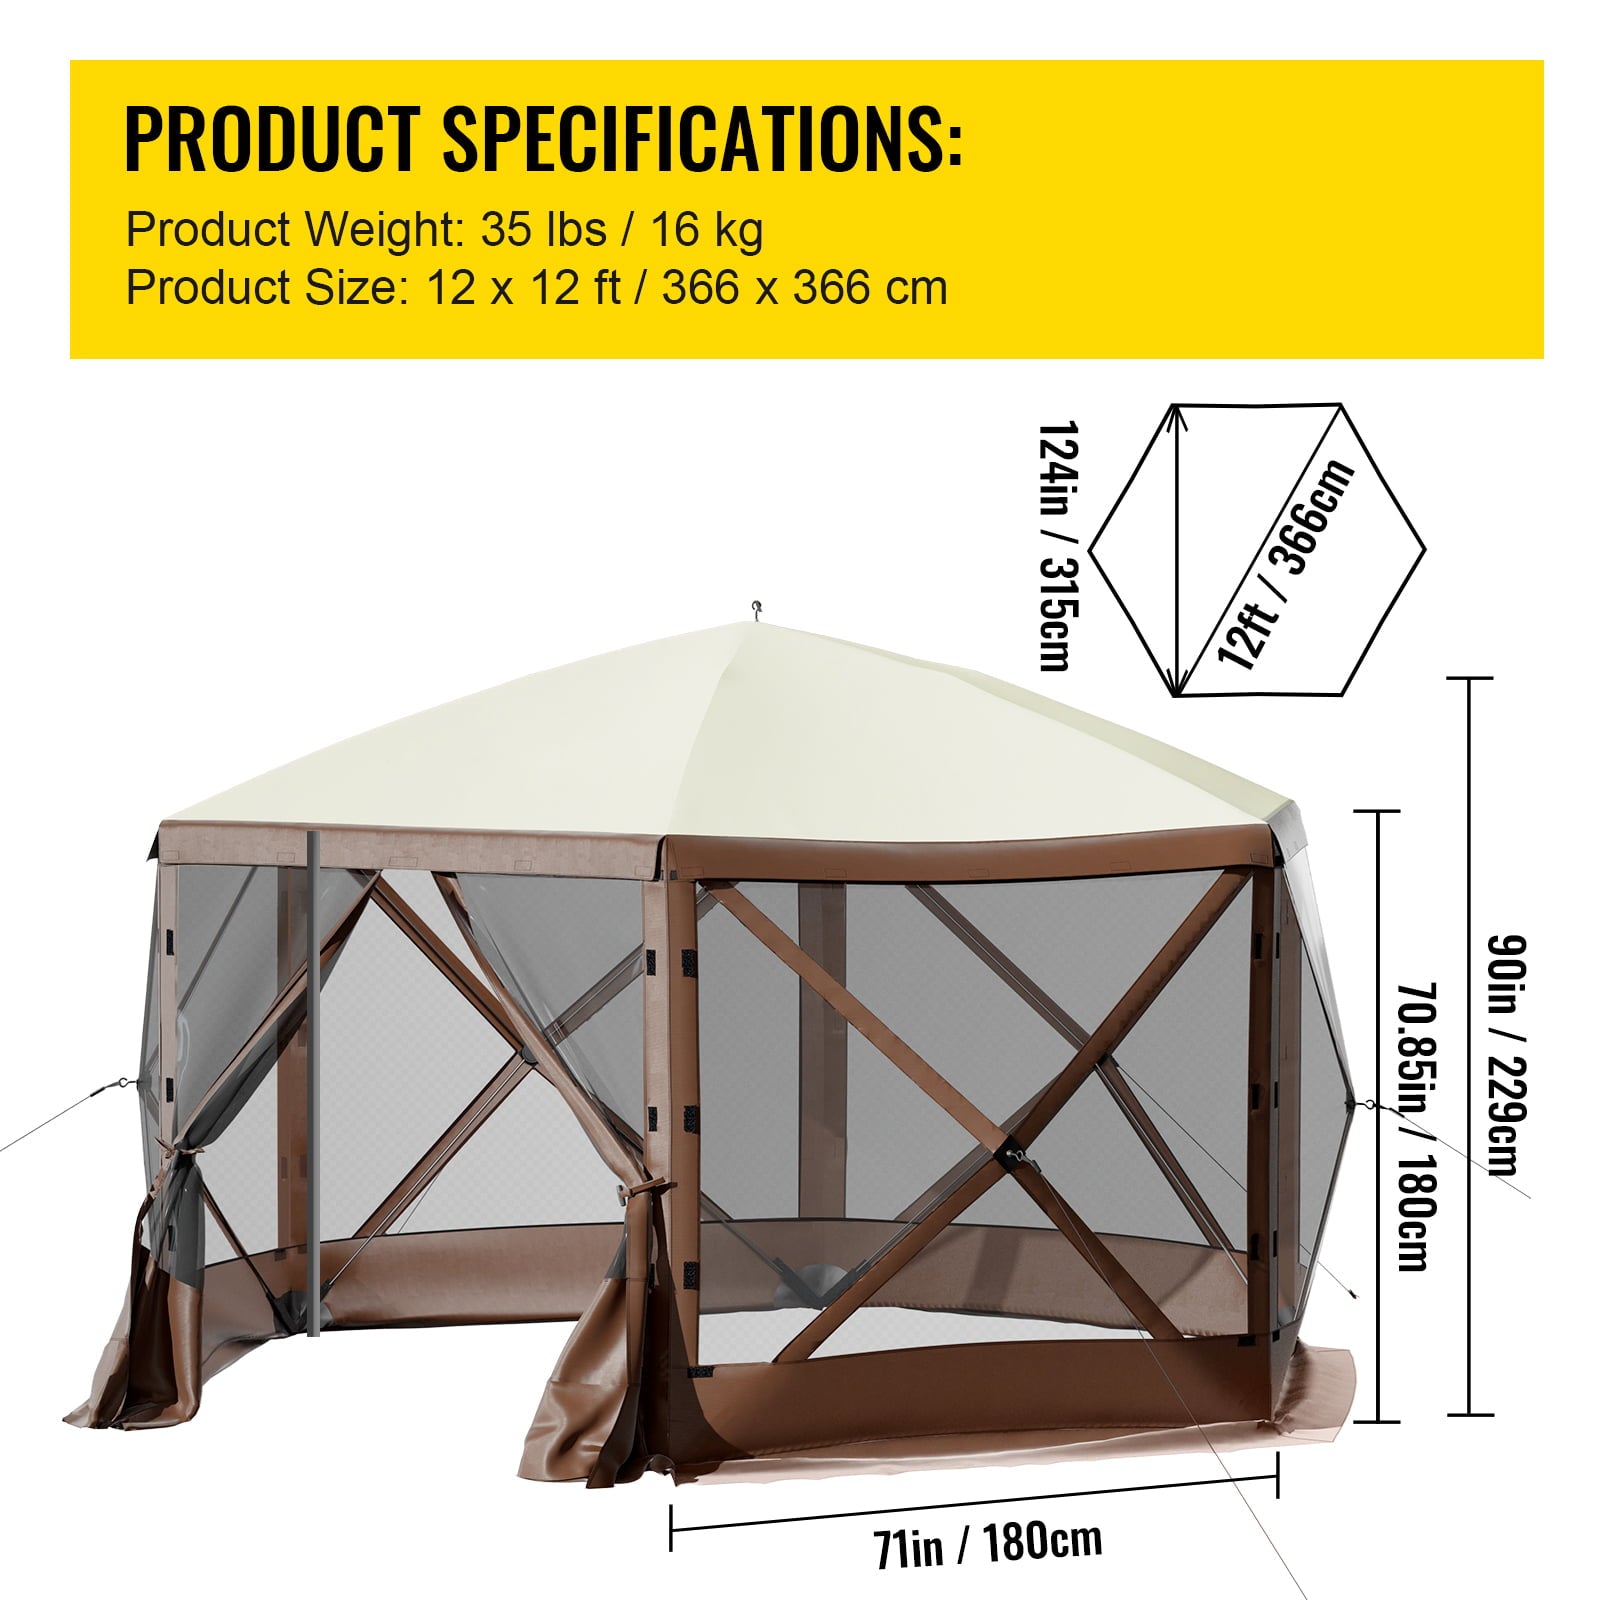 VEVORbrand Camping Gazebo Tent, 12'x12', 6 Sided Pop-up Canopy Screen Tent for 8 Person Camping, Waterproof Screen Shelter w/Portable Storage Bag, Ground Stakes, Mesh Windows, Brown & Beige